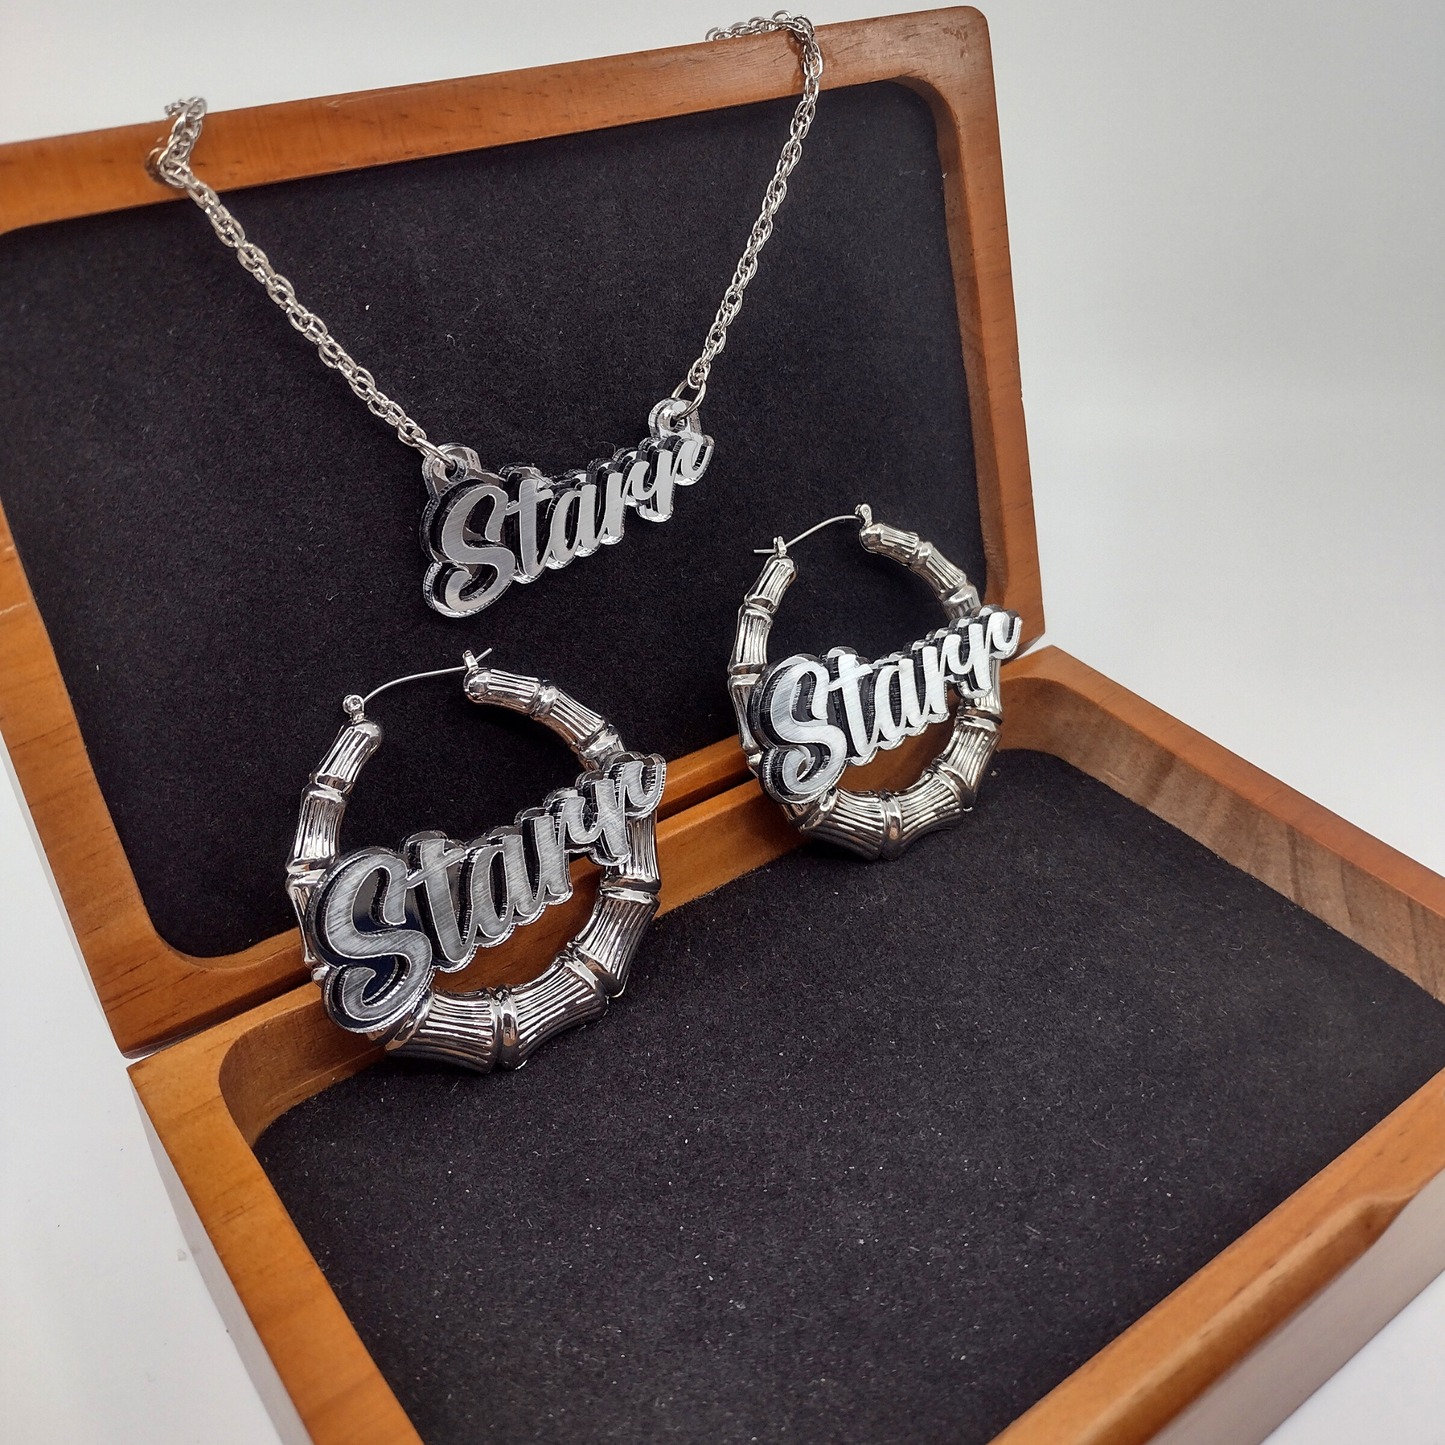 Custom Silver Hoop Earrings and a Name Necklace, Personalized Name and Background Color, Hand-made Jewelry Set